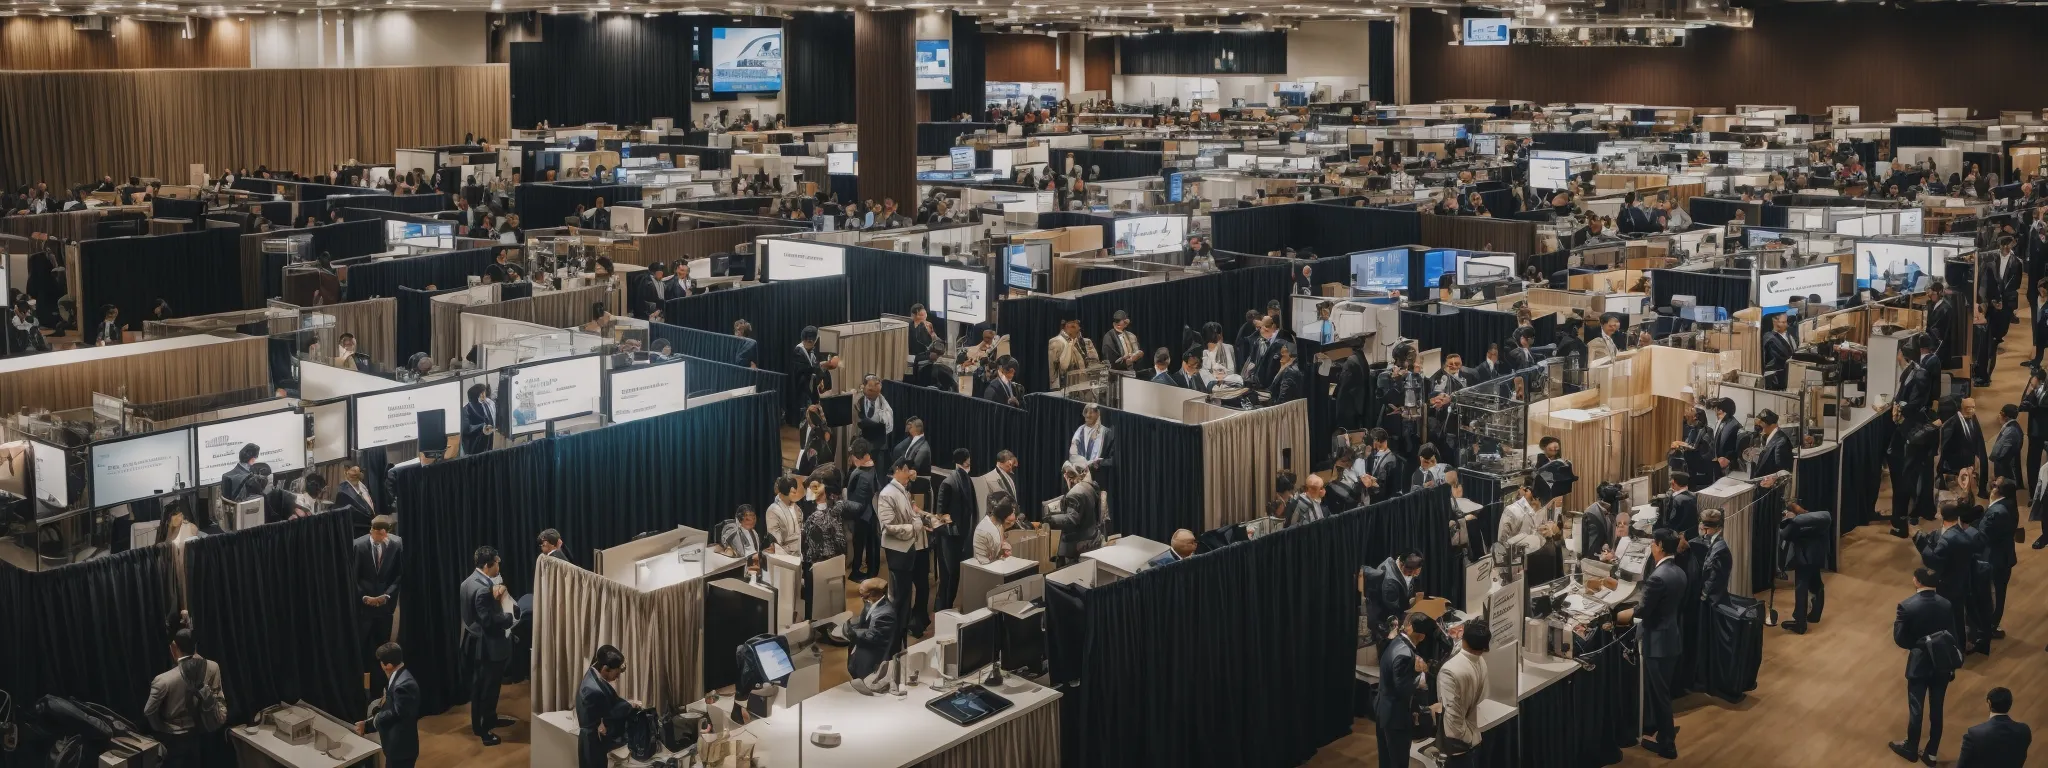 a forward-looking business professional gazes out over a bustling tech job fair, reflecting a world of opportunity in the hunt for seo mastery.